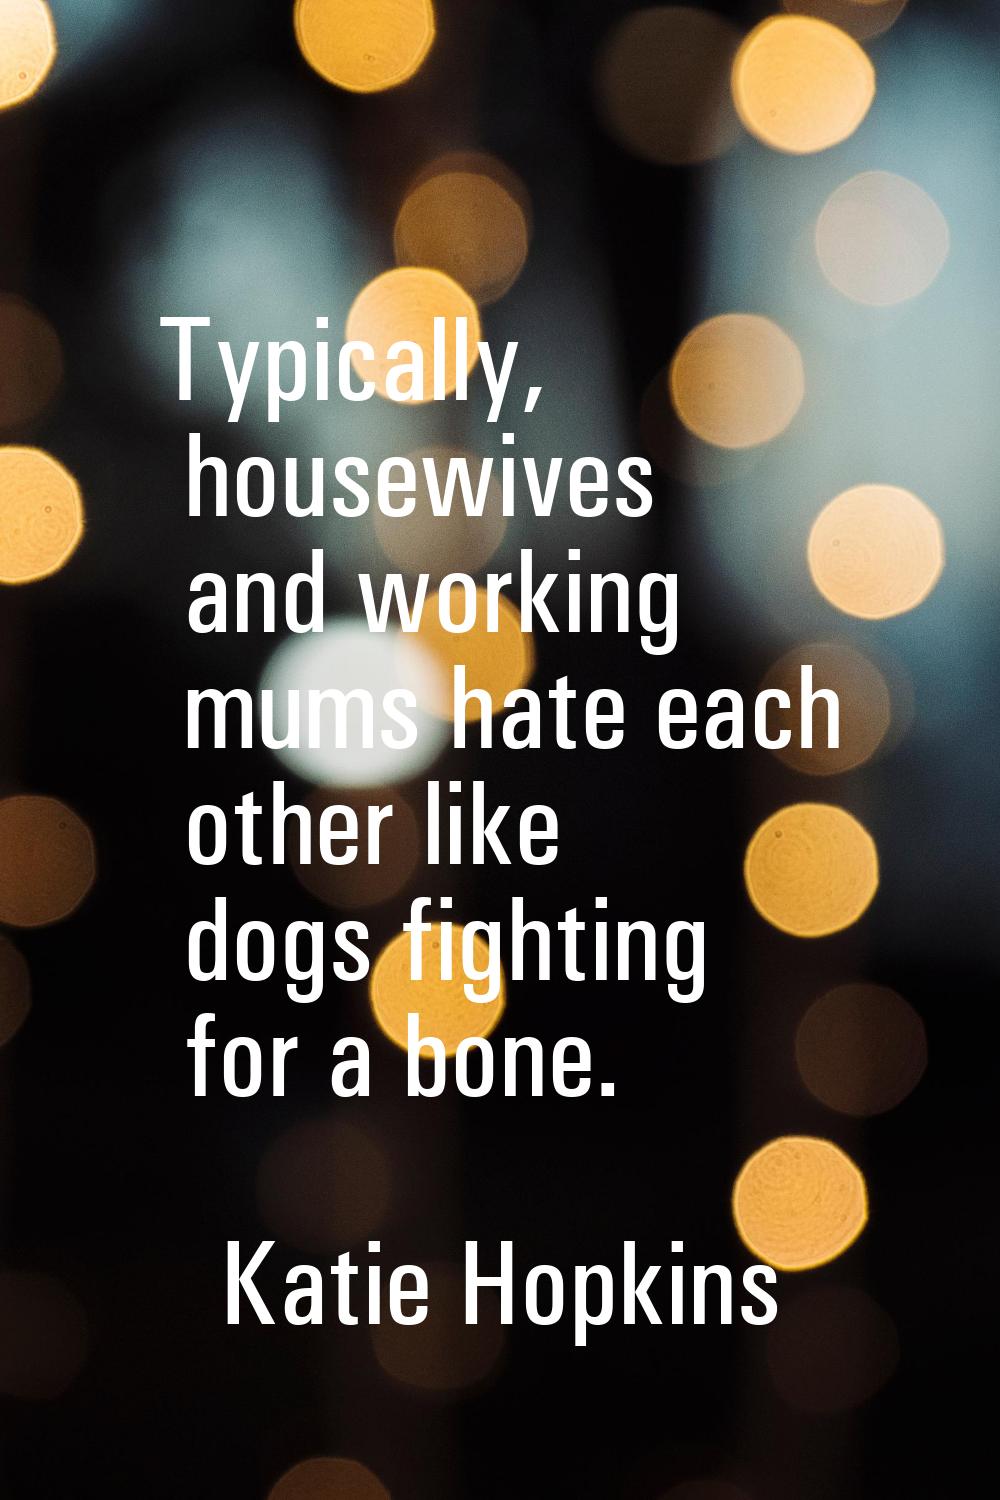 Typically, housewives and working mums hate each other like dogs fighting for a bone.